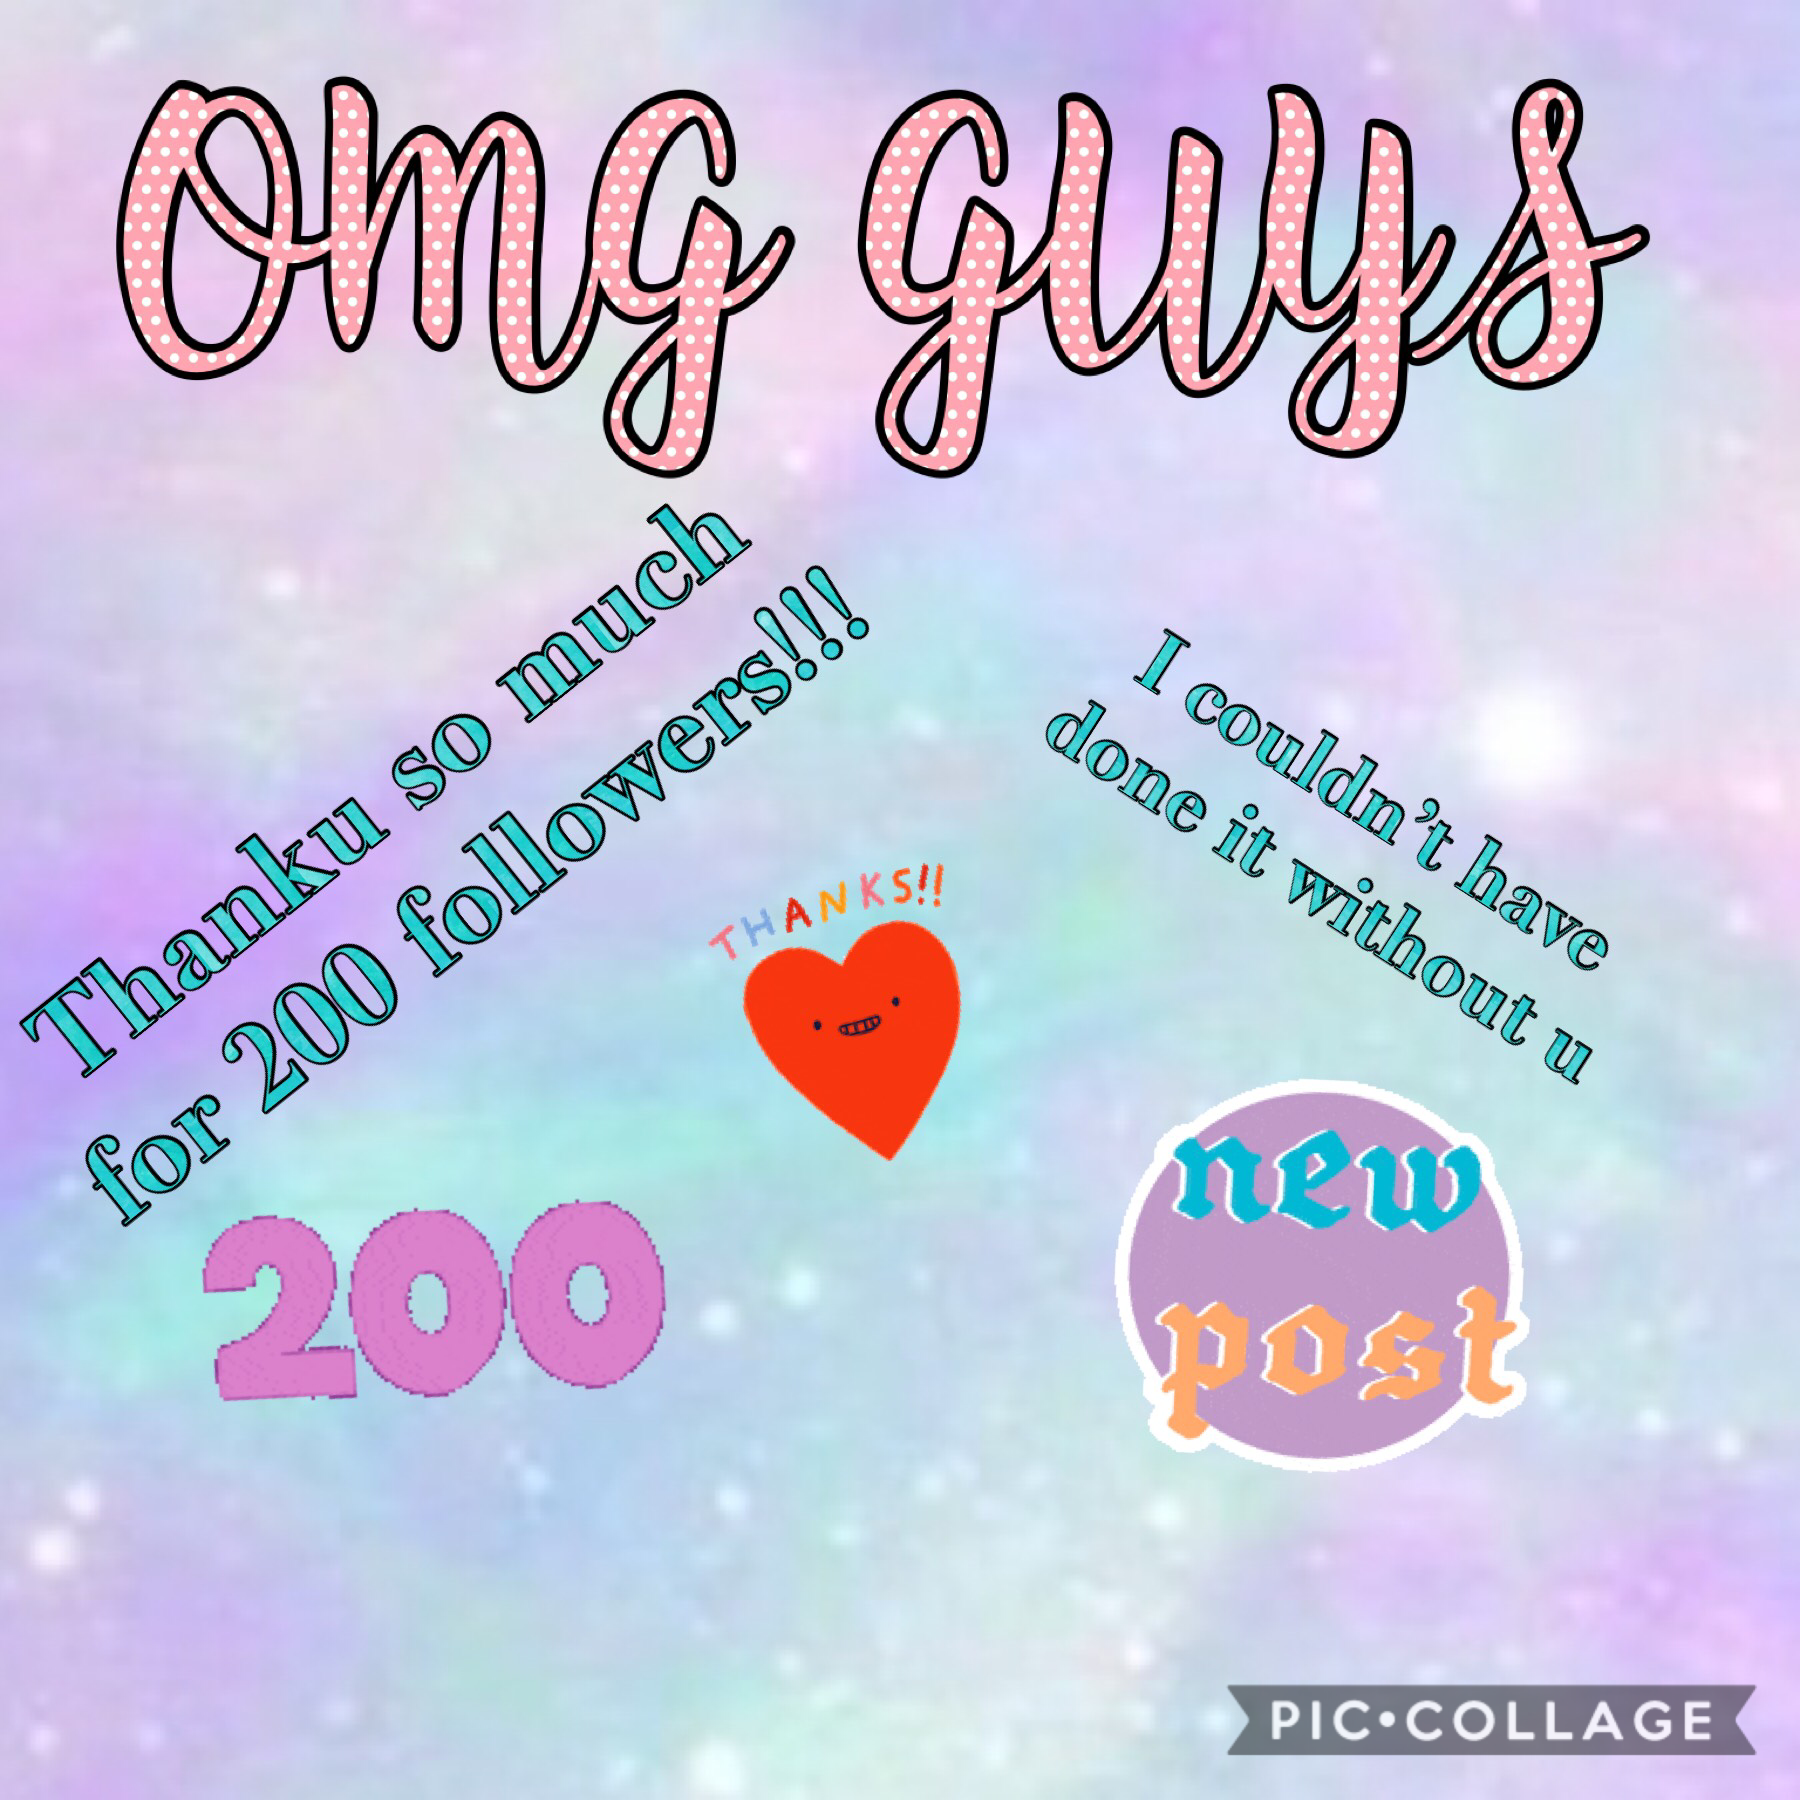 Guys I know I haven’t been active but know I am back!
Thx SOOOOO MUCH FOR 200 FOLLOWERS!!!!!!!! I WISH THE BEST FOR U GUYS
LOVE UUUUUU ❤️